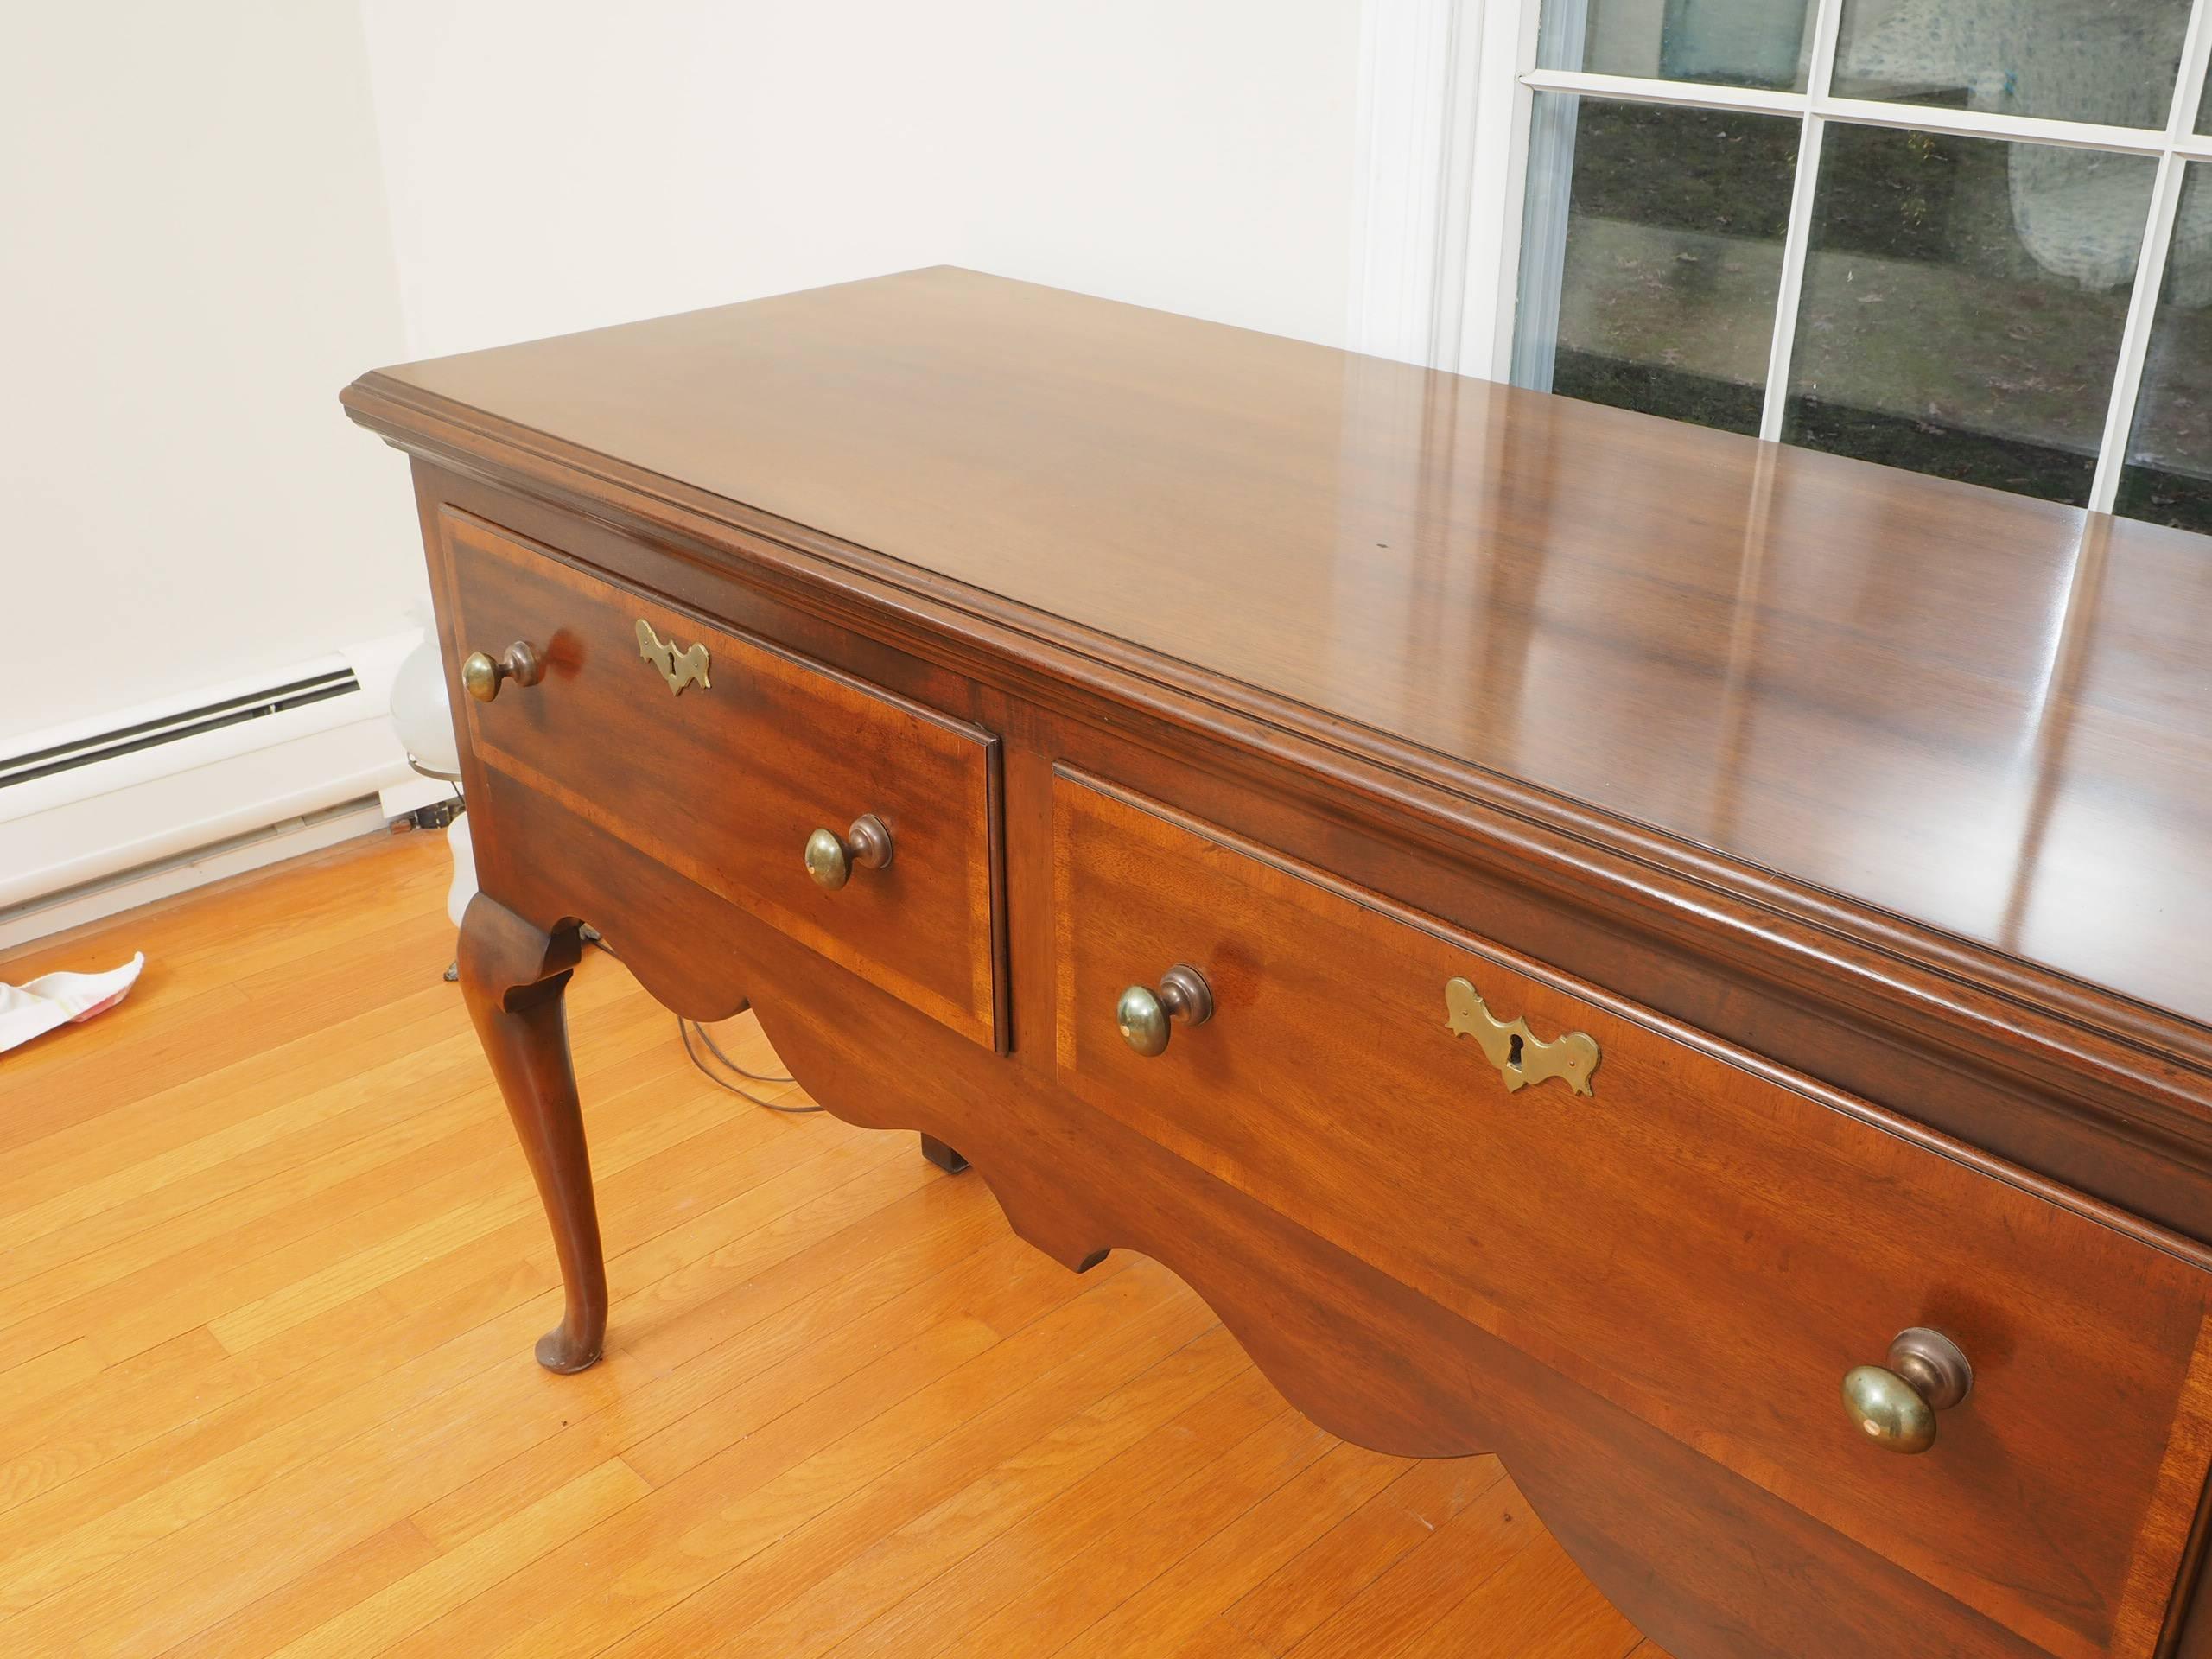 Fine mahogany with carved top molding, the apron with cross-banded drawers with brass pulls and escutcheons. With a scalloped frieze on front and sides, and recessed side panels. The whole raised on shaped cabriole legs in front and squared back